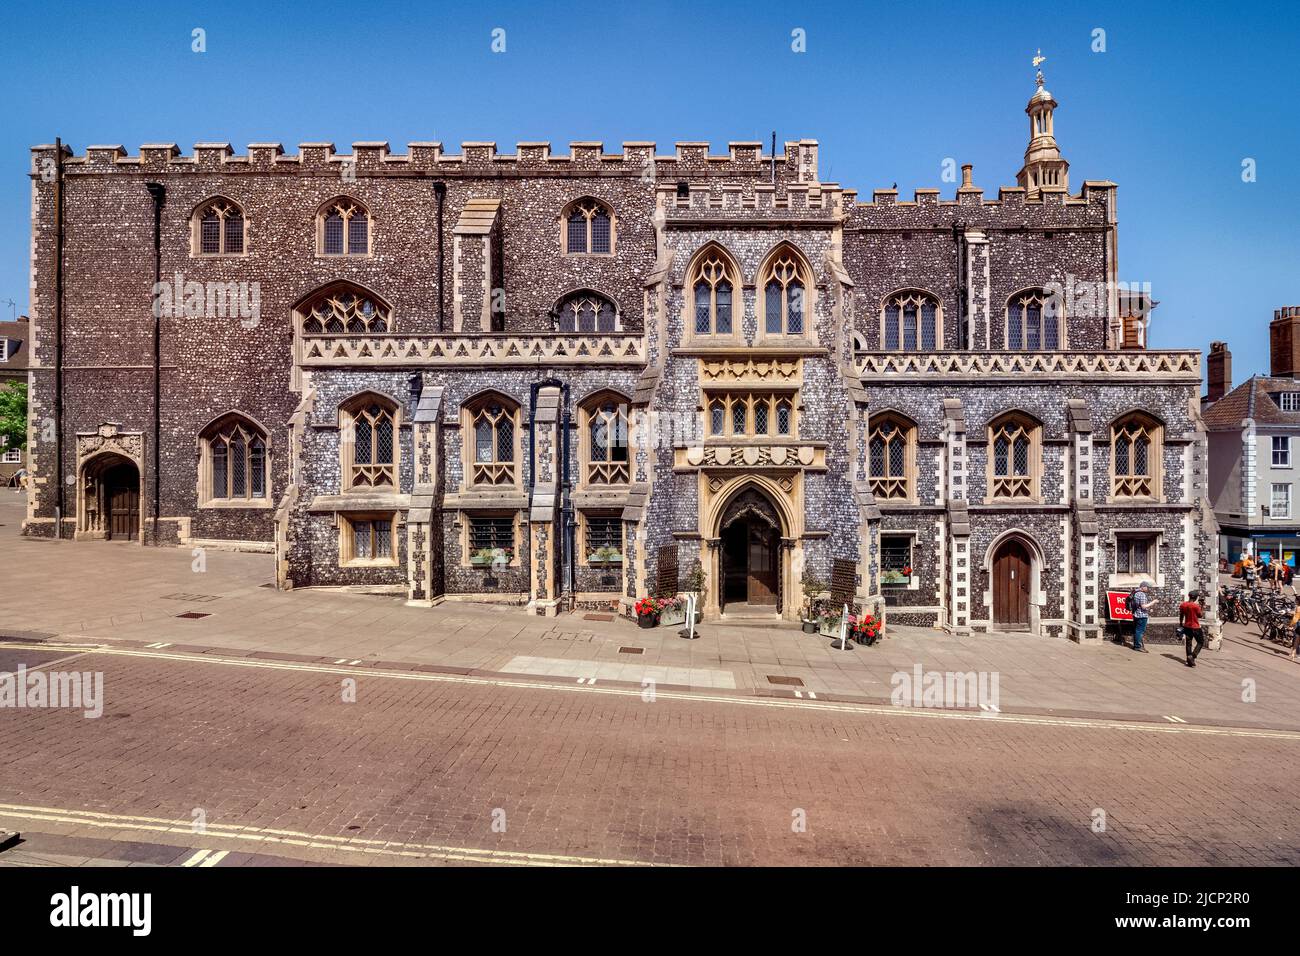 29 June 2019: Norwich, Norfolk, UK - The Guildhall, the 15th Century former local government offices, on Gaol Hill, Norwich. Stock Photo